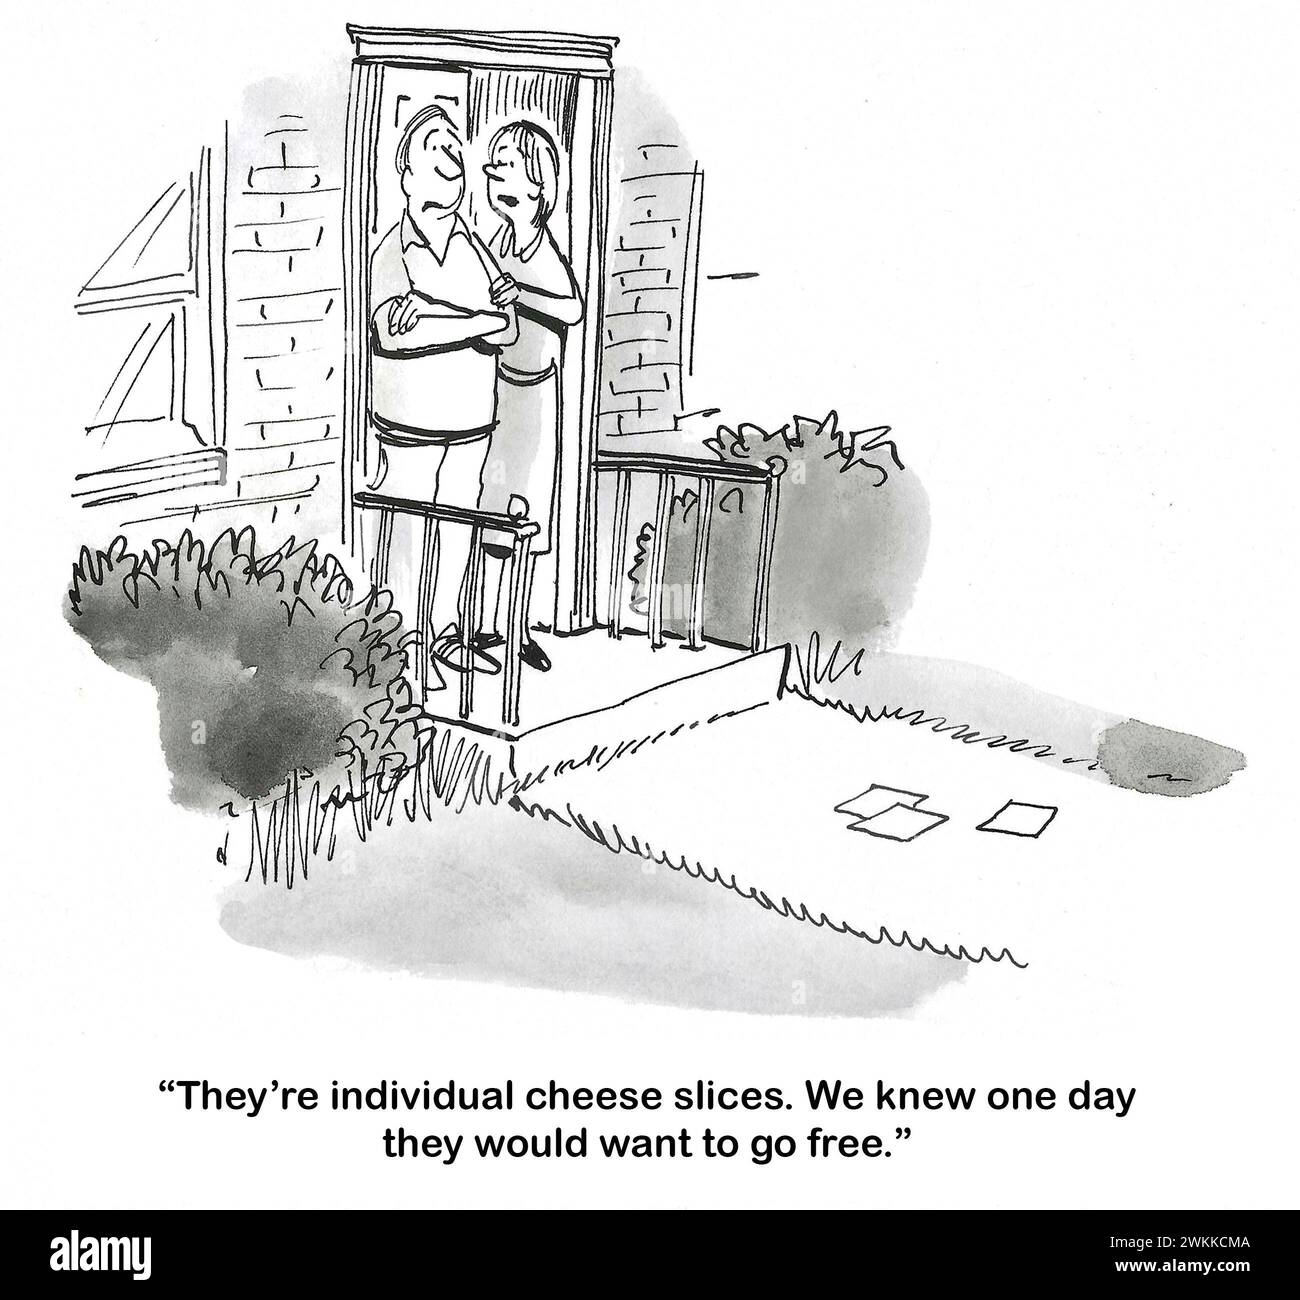 BW cartoon of a man crying as his wife tells him that they knew that one day the cheese slices would 'want to go free'. Stock Photo